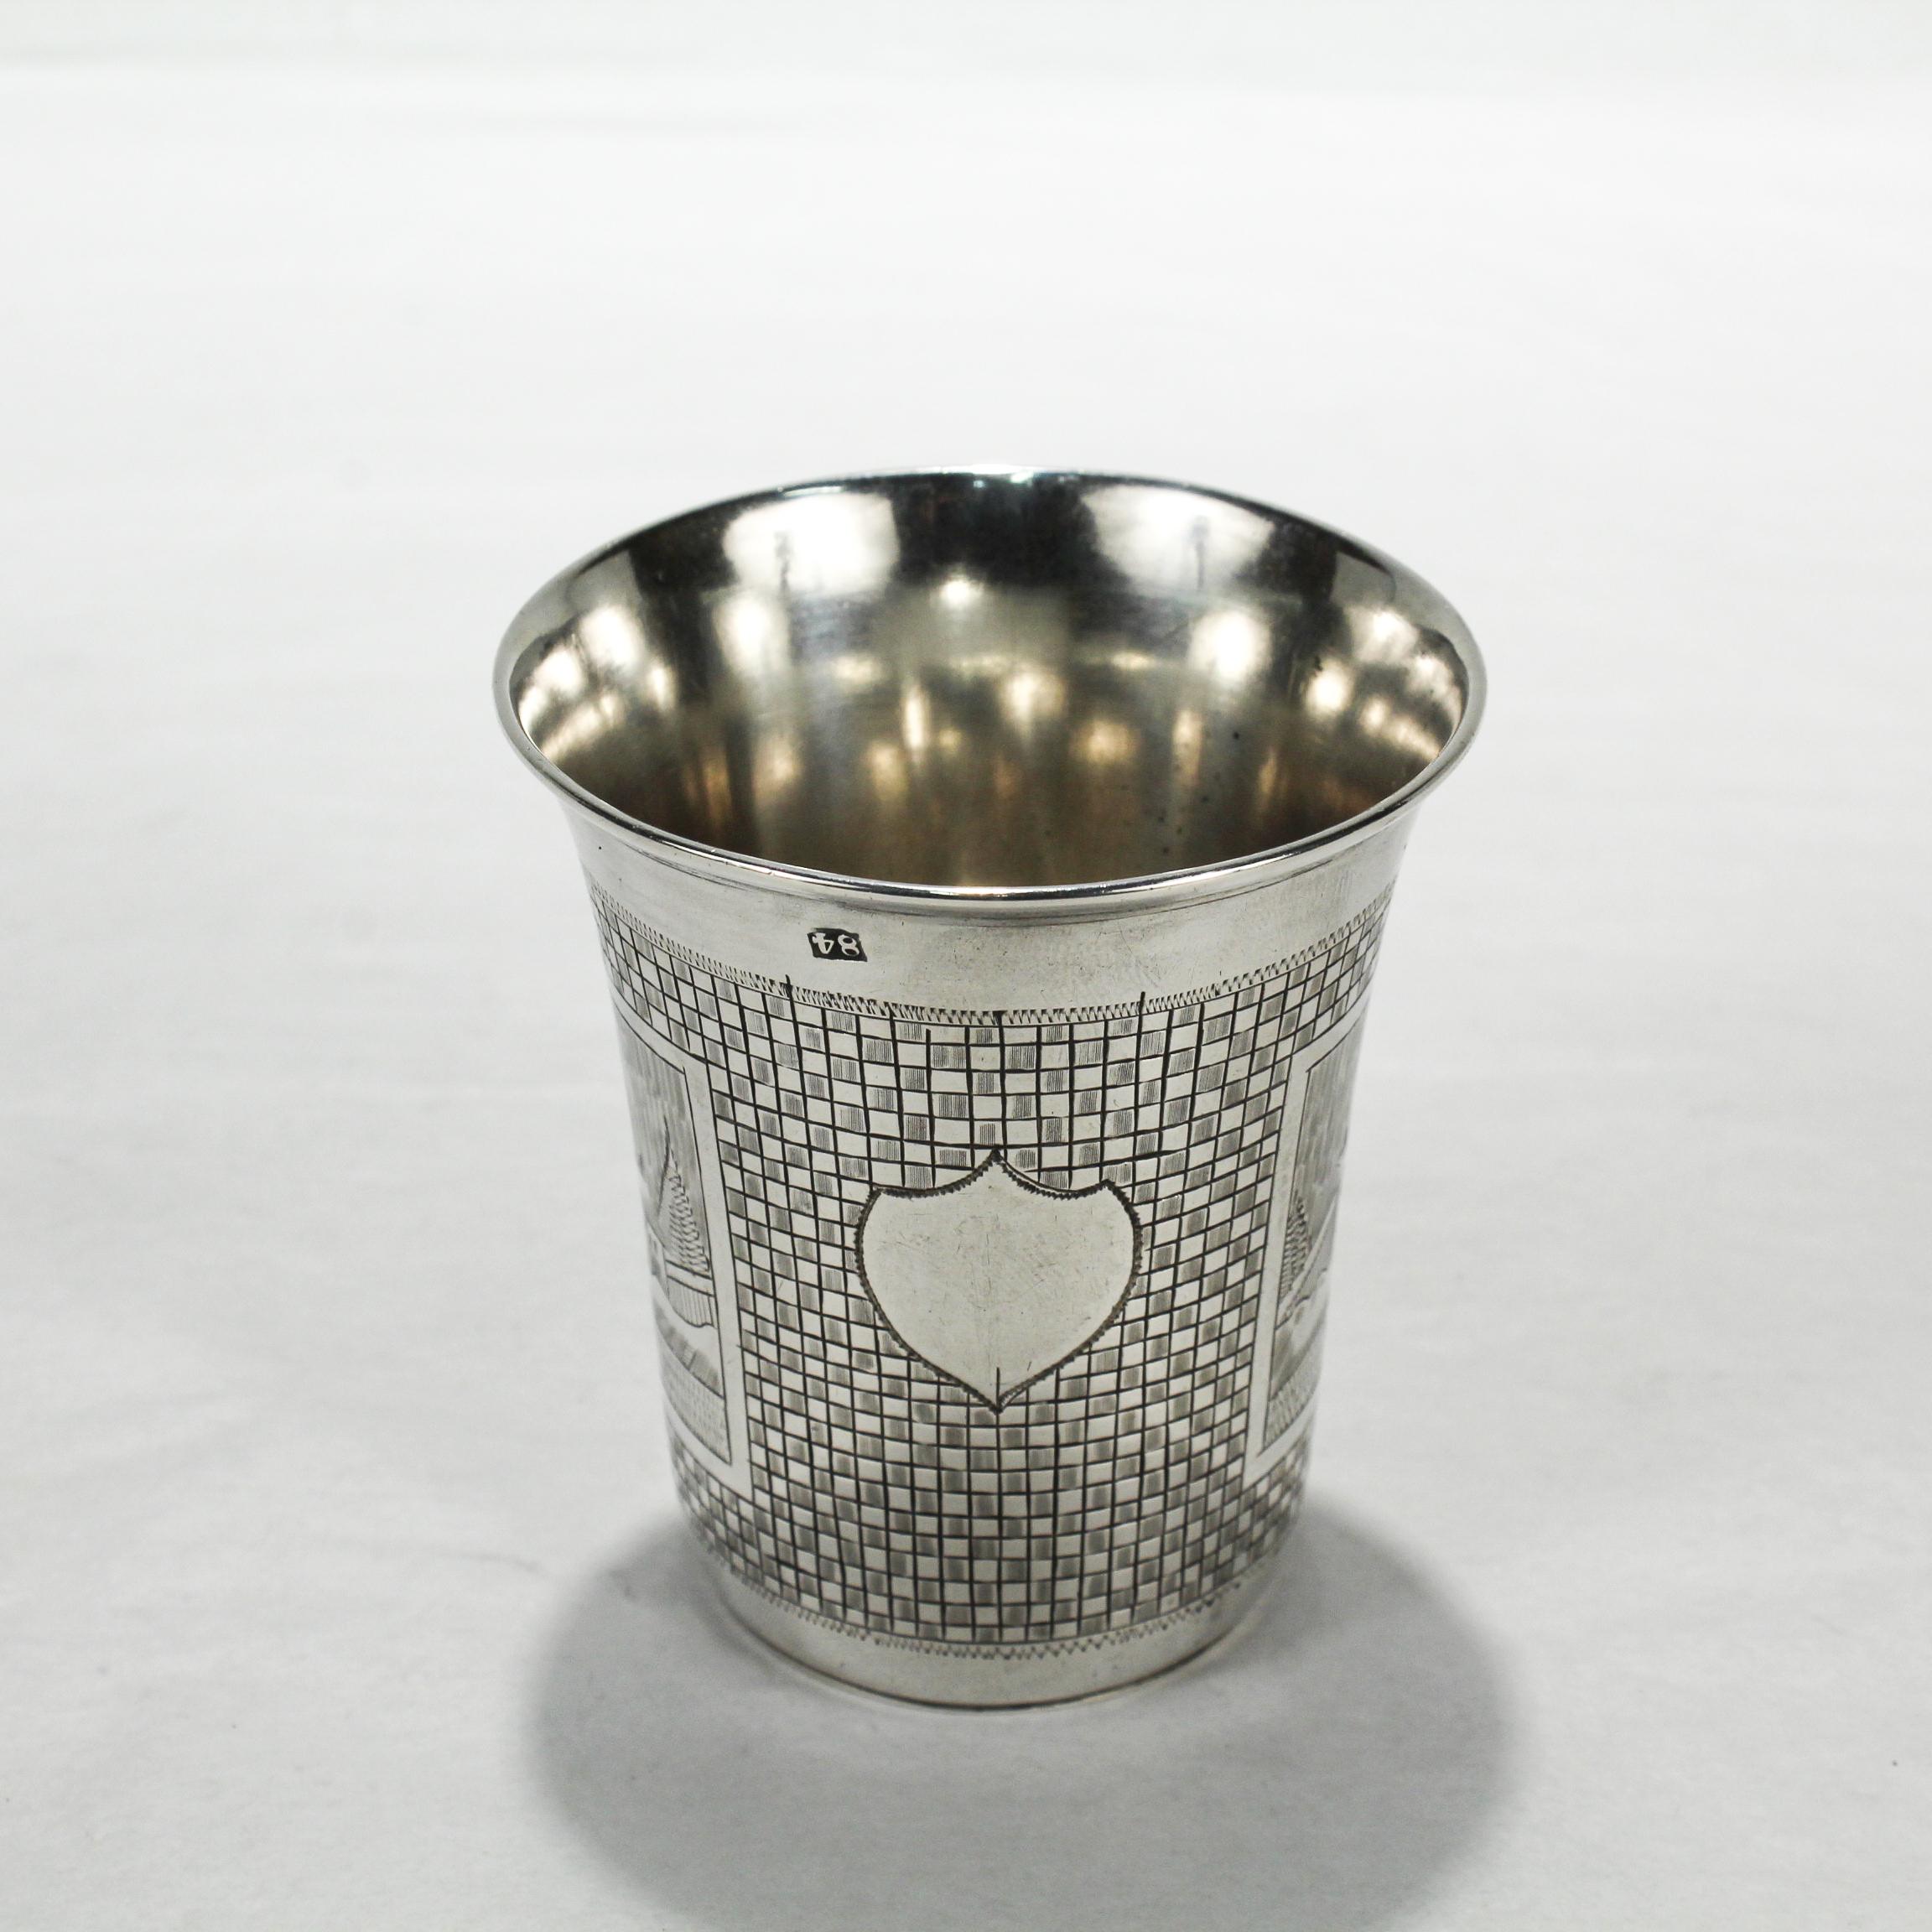 Russian Empire Antique Engraved Russian 84 Silver Vodka or Kiddush Cup by Mikhail Dimitriyev For Sale